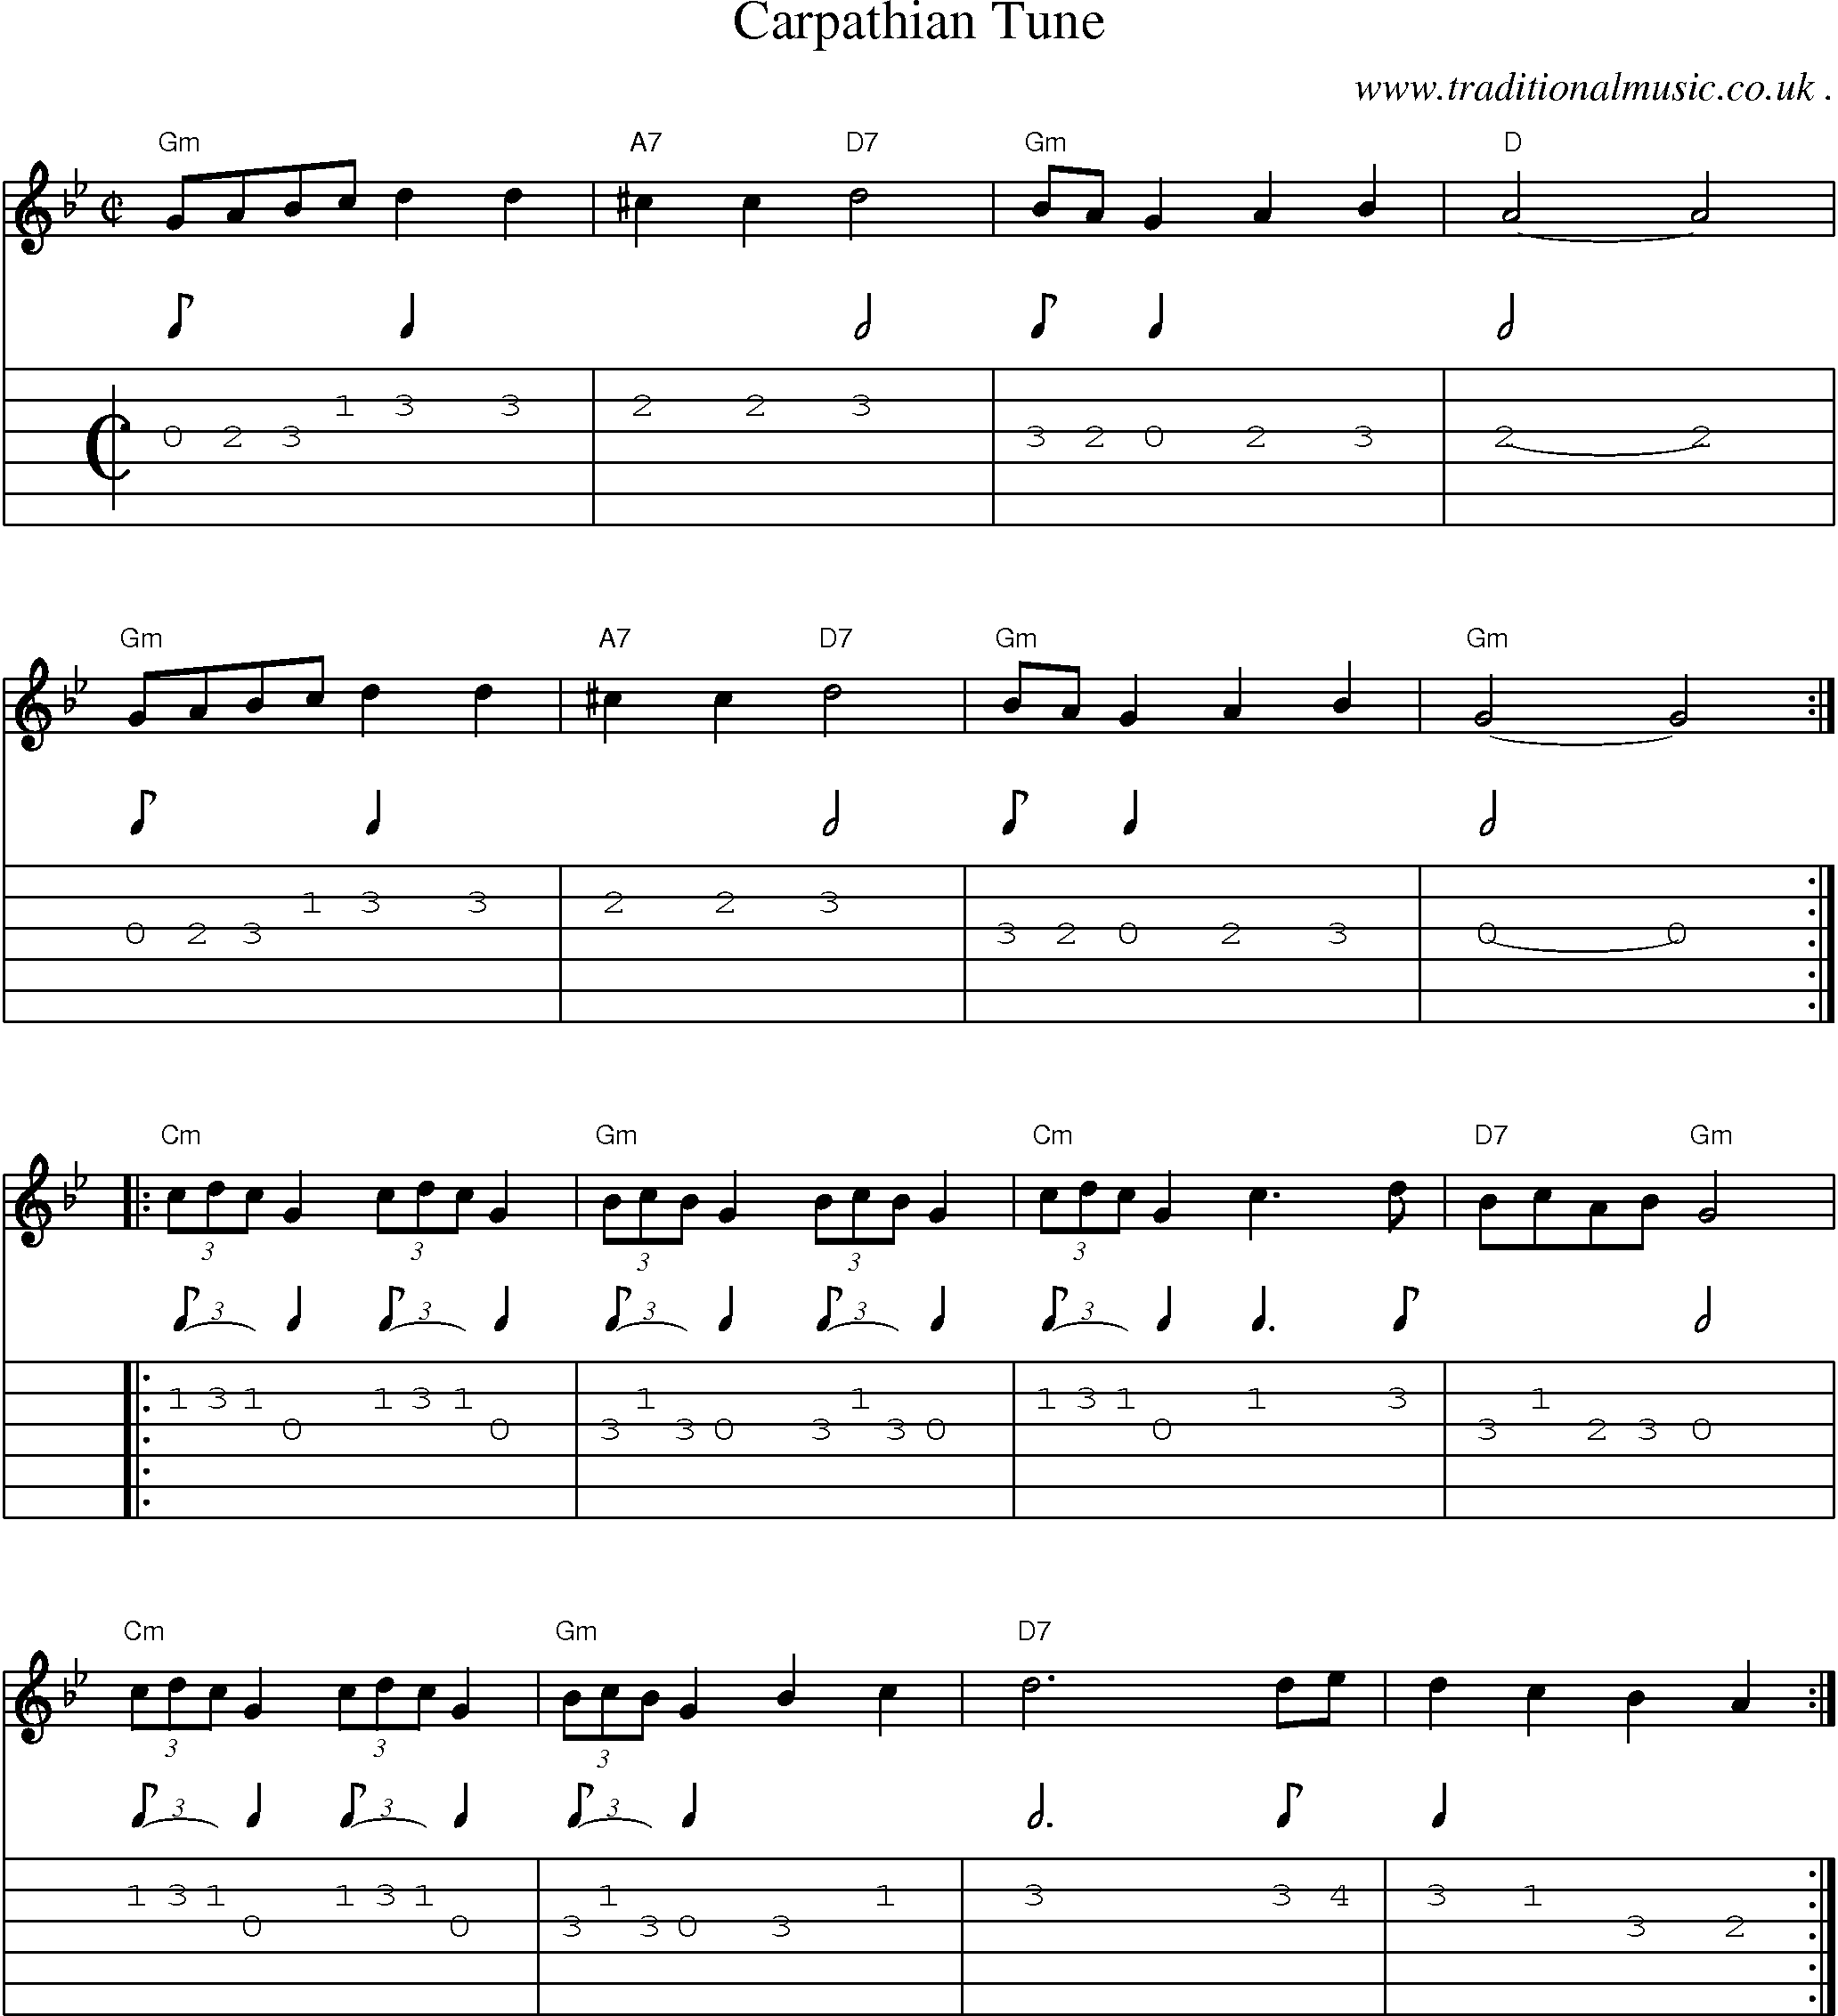 Music Score and Guitar Tabs for Carpathian Tune